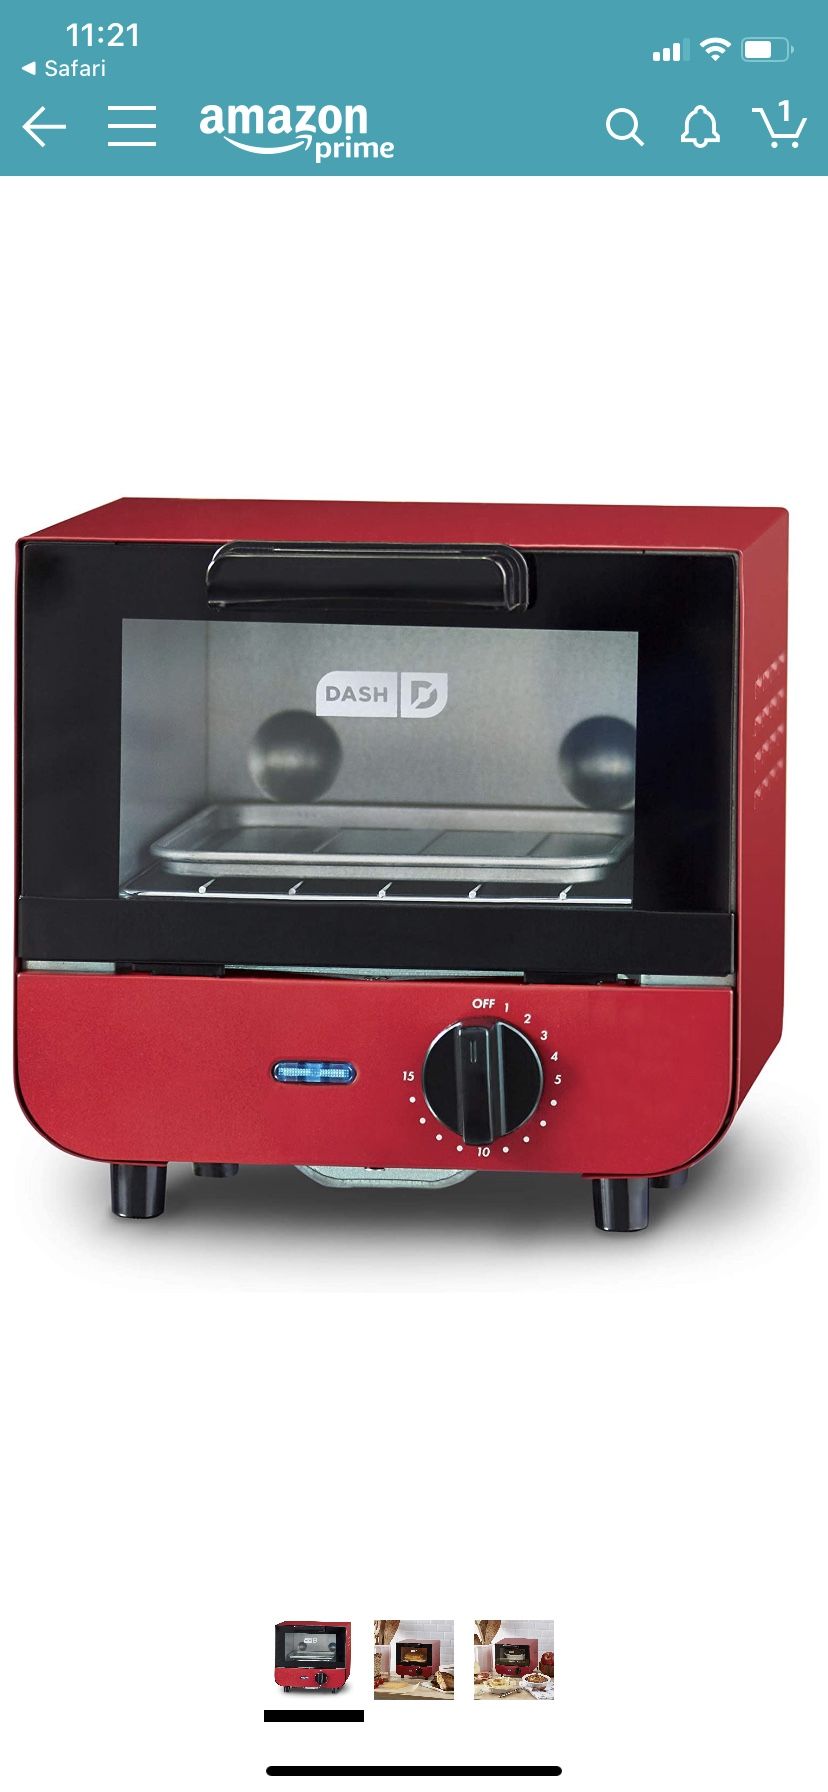 DASH DMTO100GBRD04 Mini Toaster Oven Cooker for Bread, Bagels, Cookies, Pizza, Paninis & More with Baking Tray, Rack + Auto Shut Off Feature Red